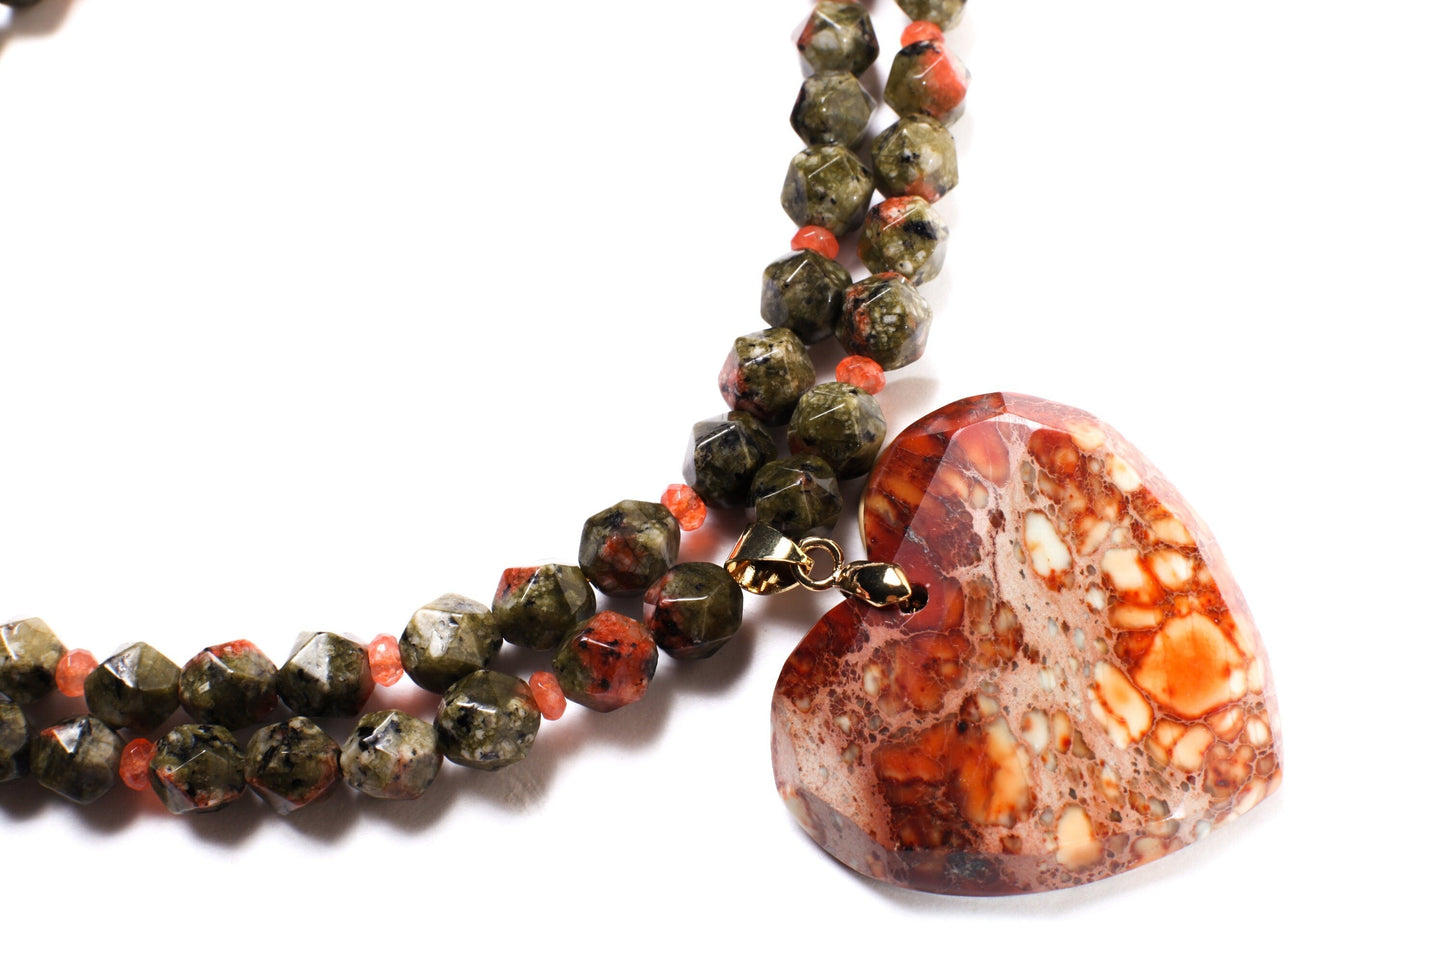 Natural Aqua Terra Jasper Faceted Heart Pendant with Unakite Jasper Octagon Faceted with Carnelian Accent Spacer Beads 2 Line 21&quot; Necklace